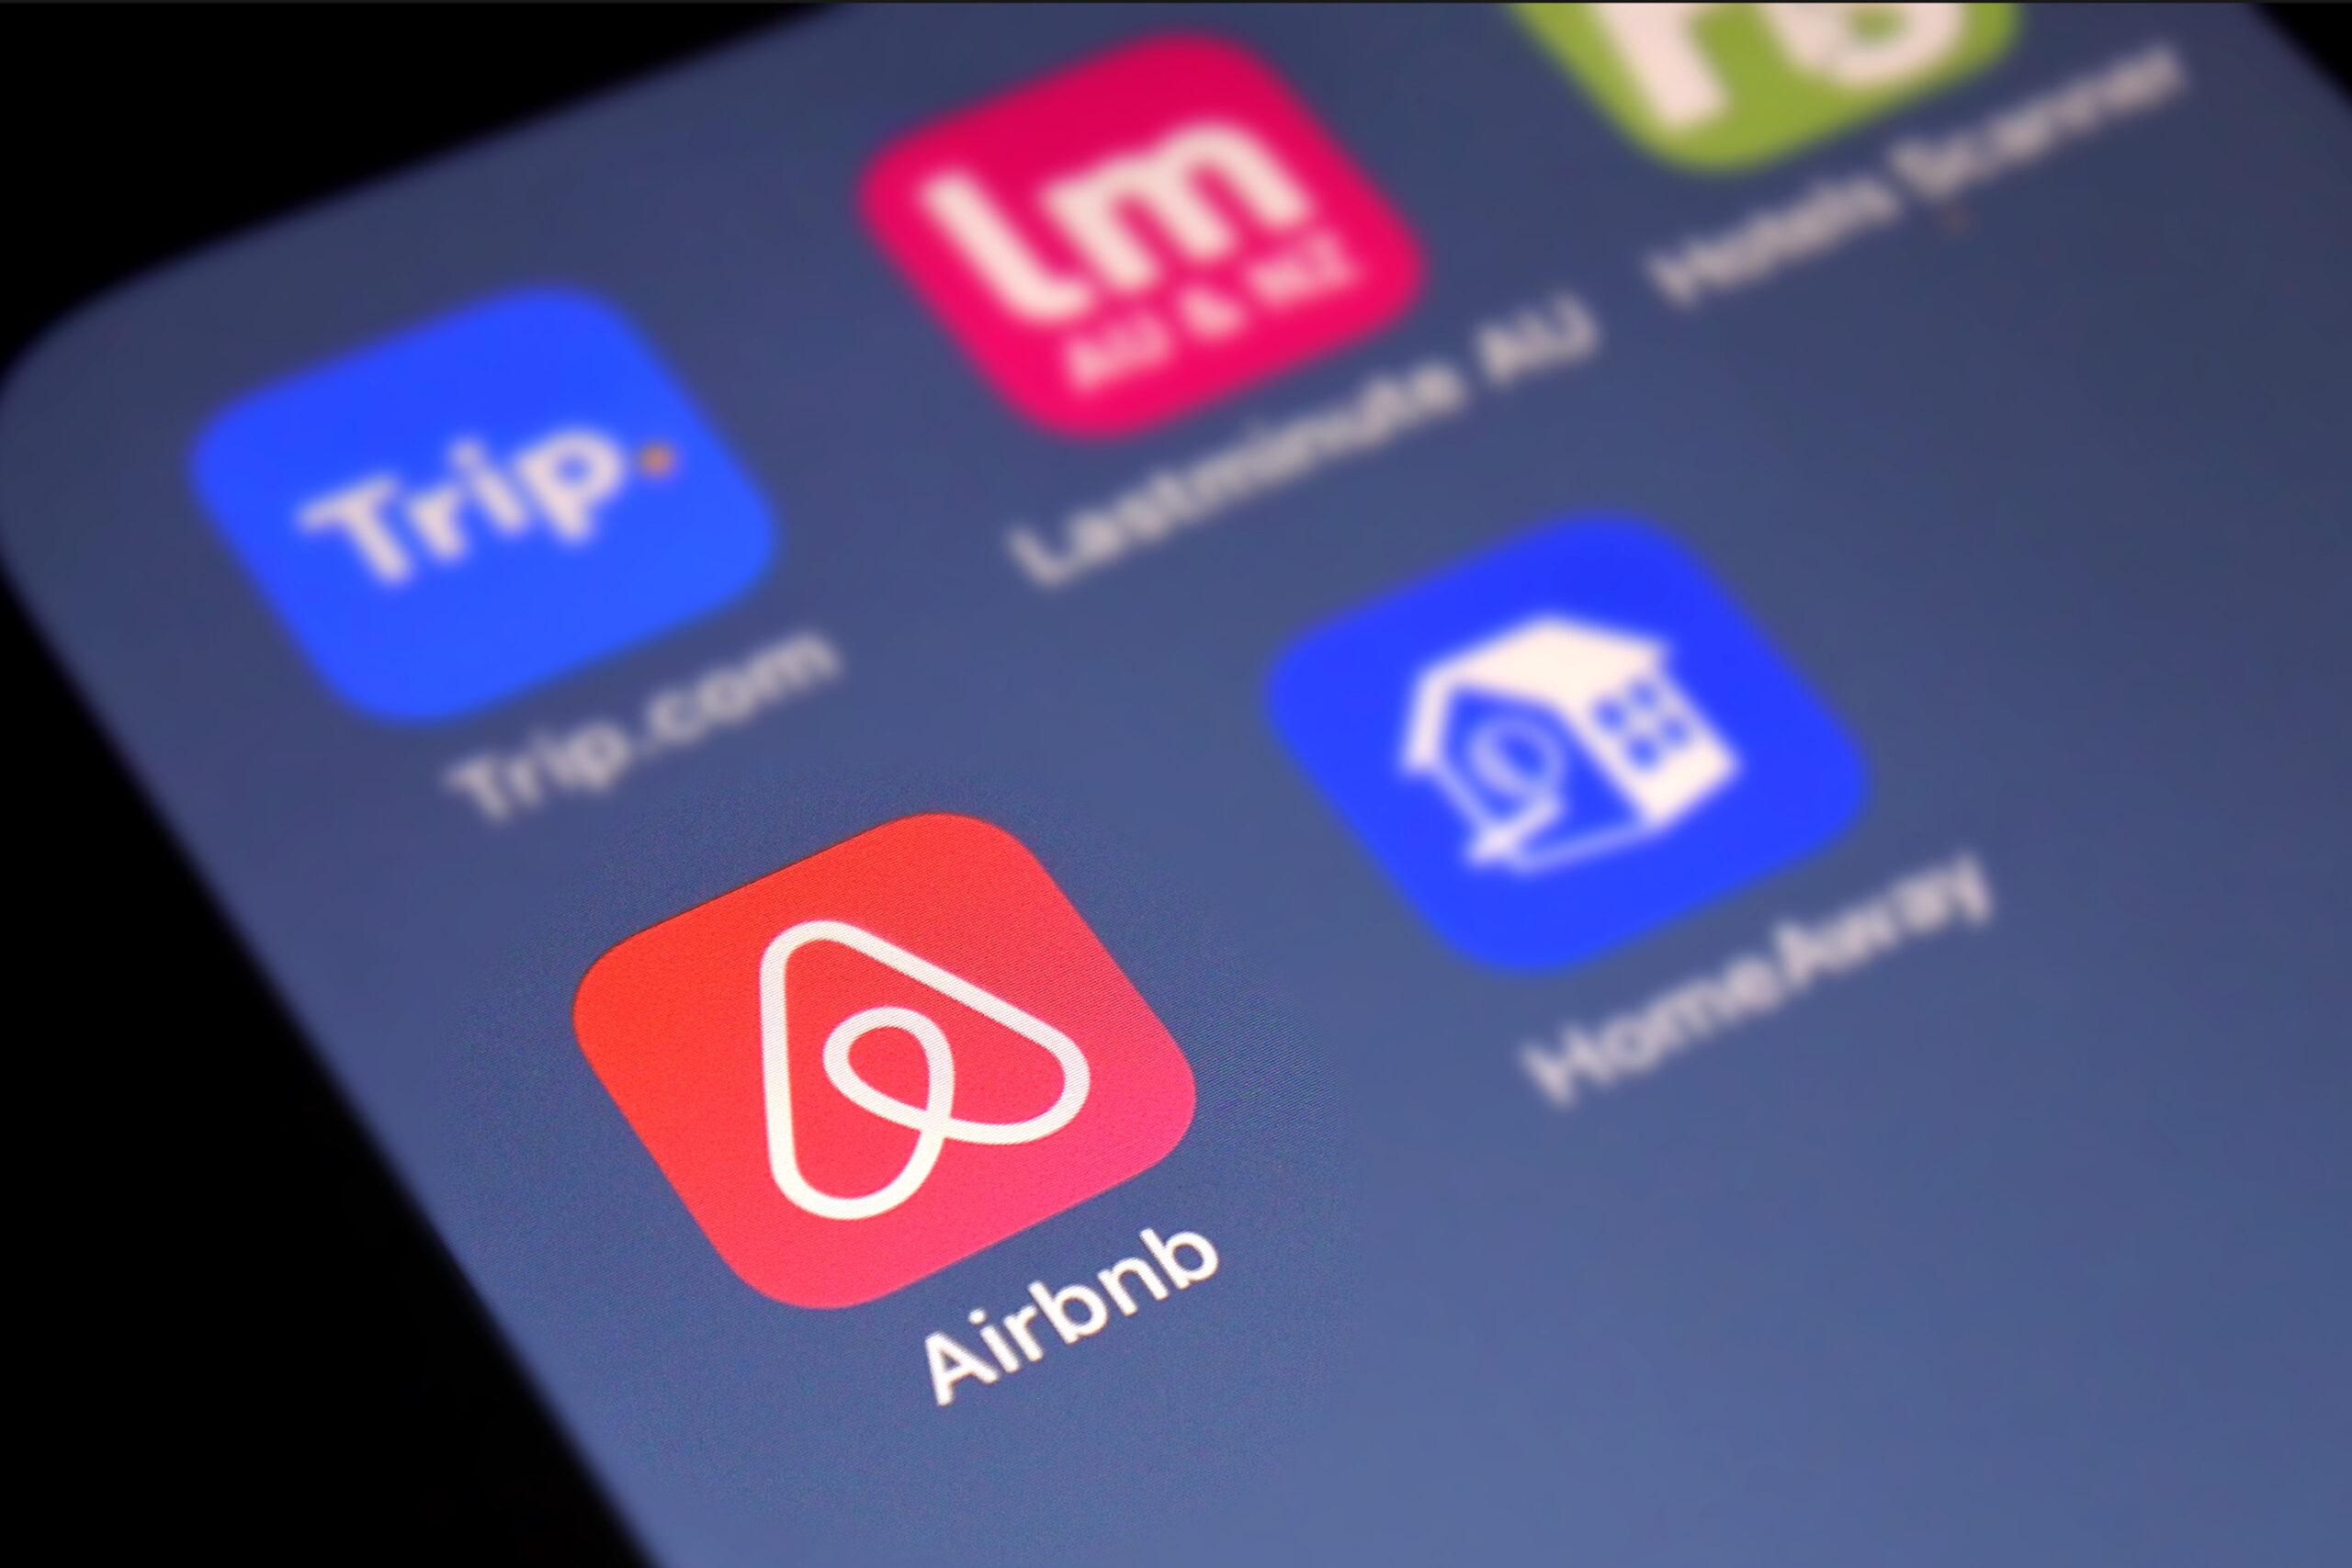 Airbnb online marketplace application